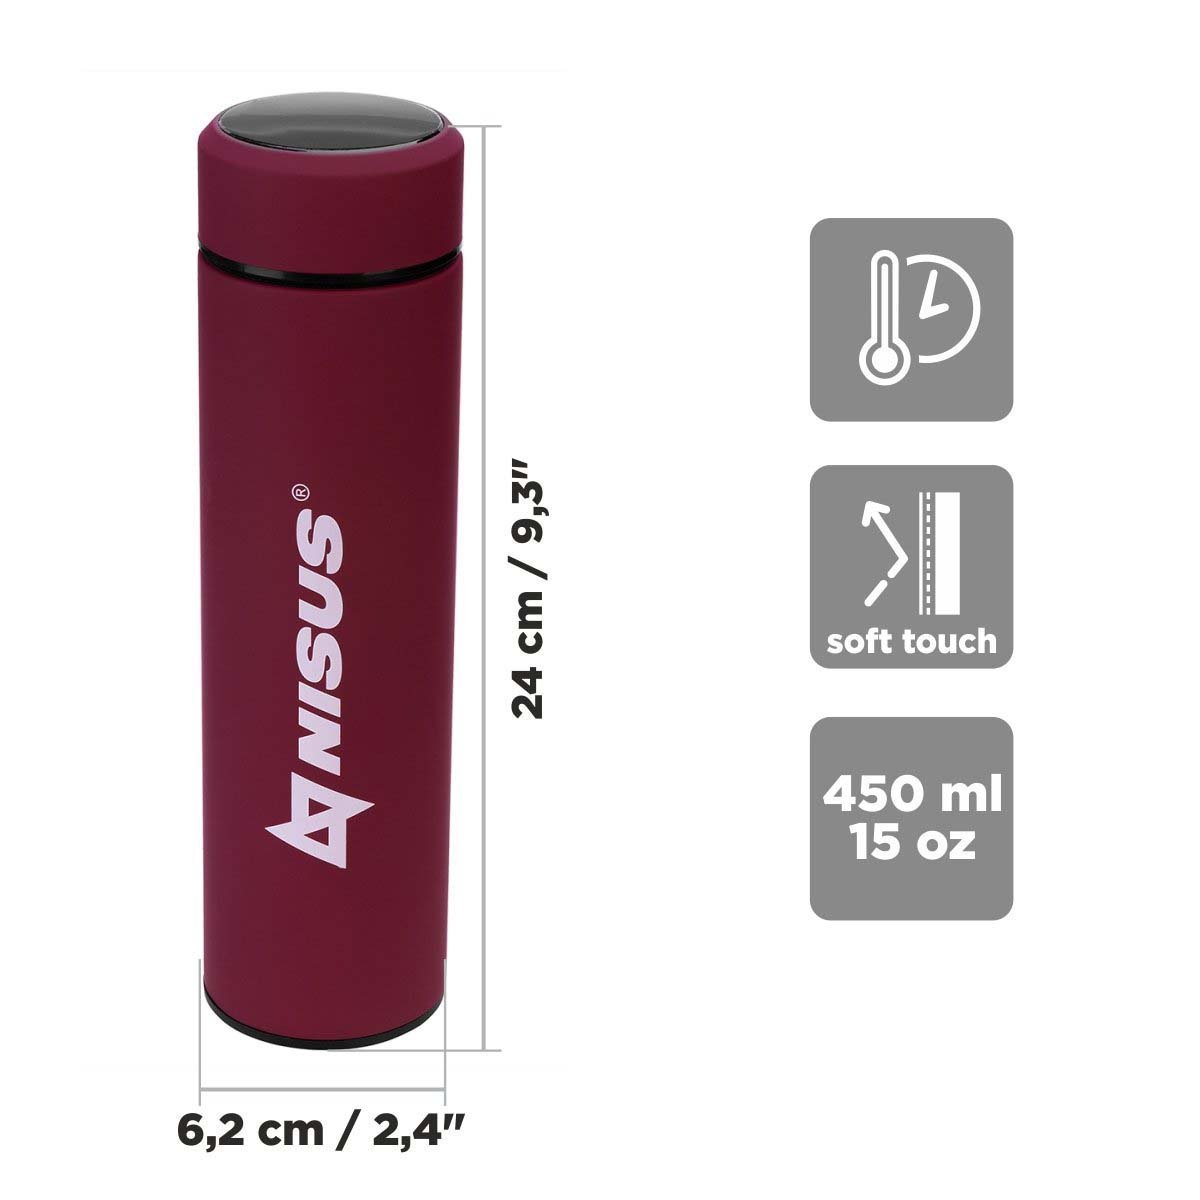 Stainless Insulated Water Bottle with LED Temperature Display, 15 oz is 9.3 inches high and 2.4 inches wide